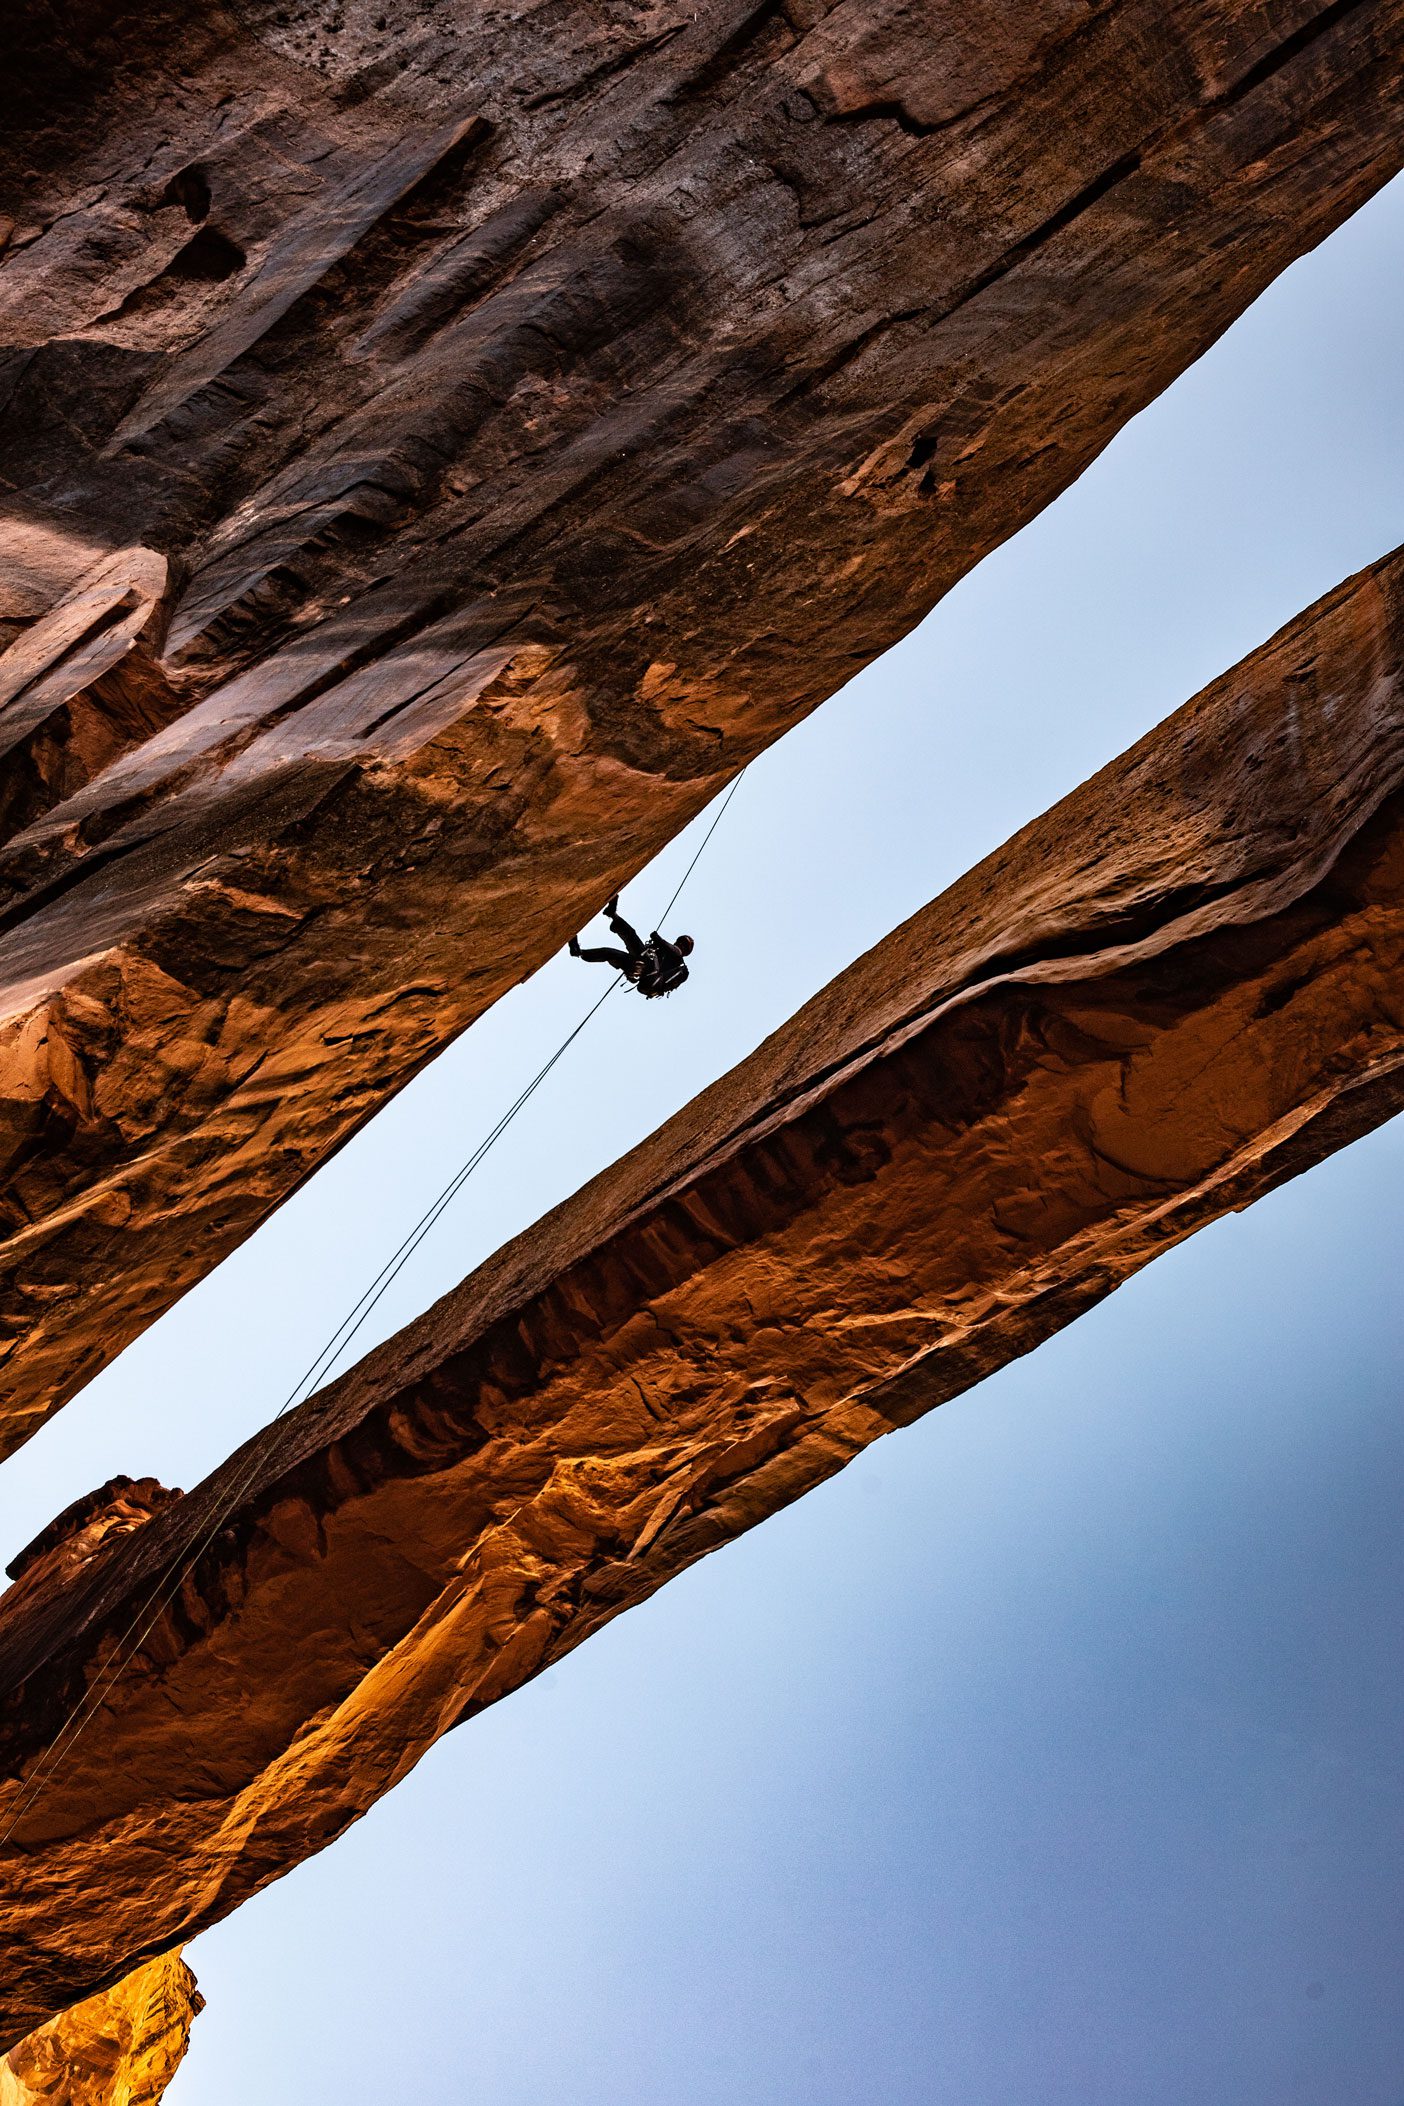 Stacy Taniguchi is pictured rappelling from Morning Glory Arch